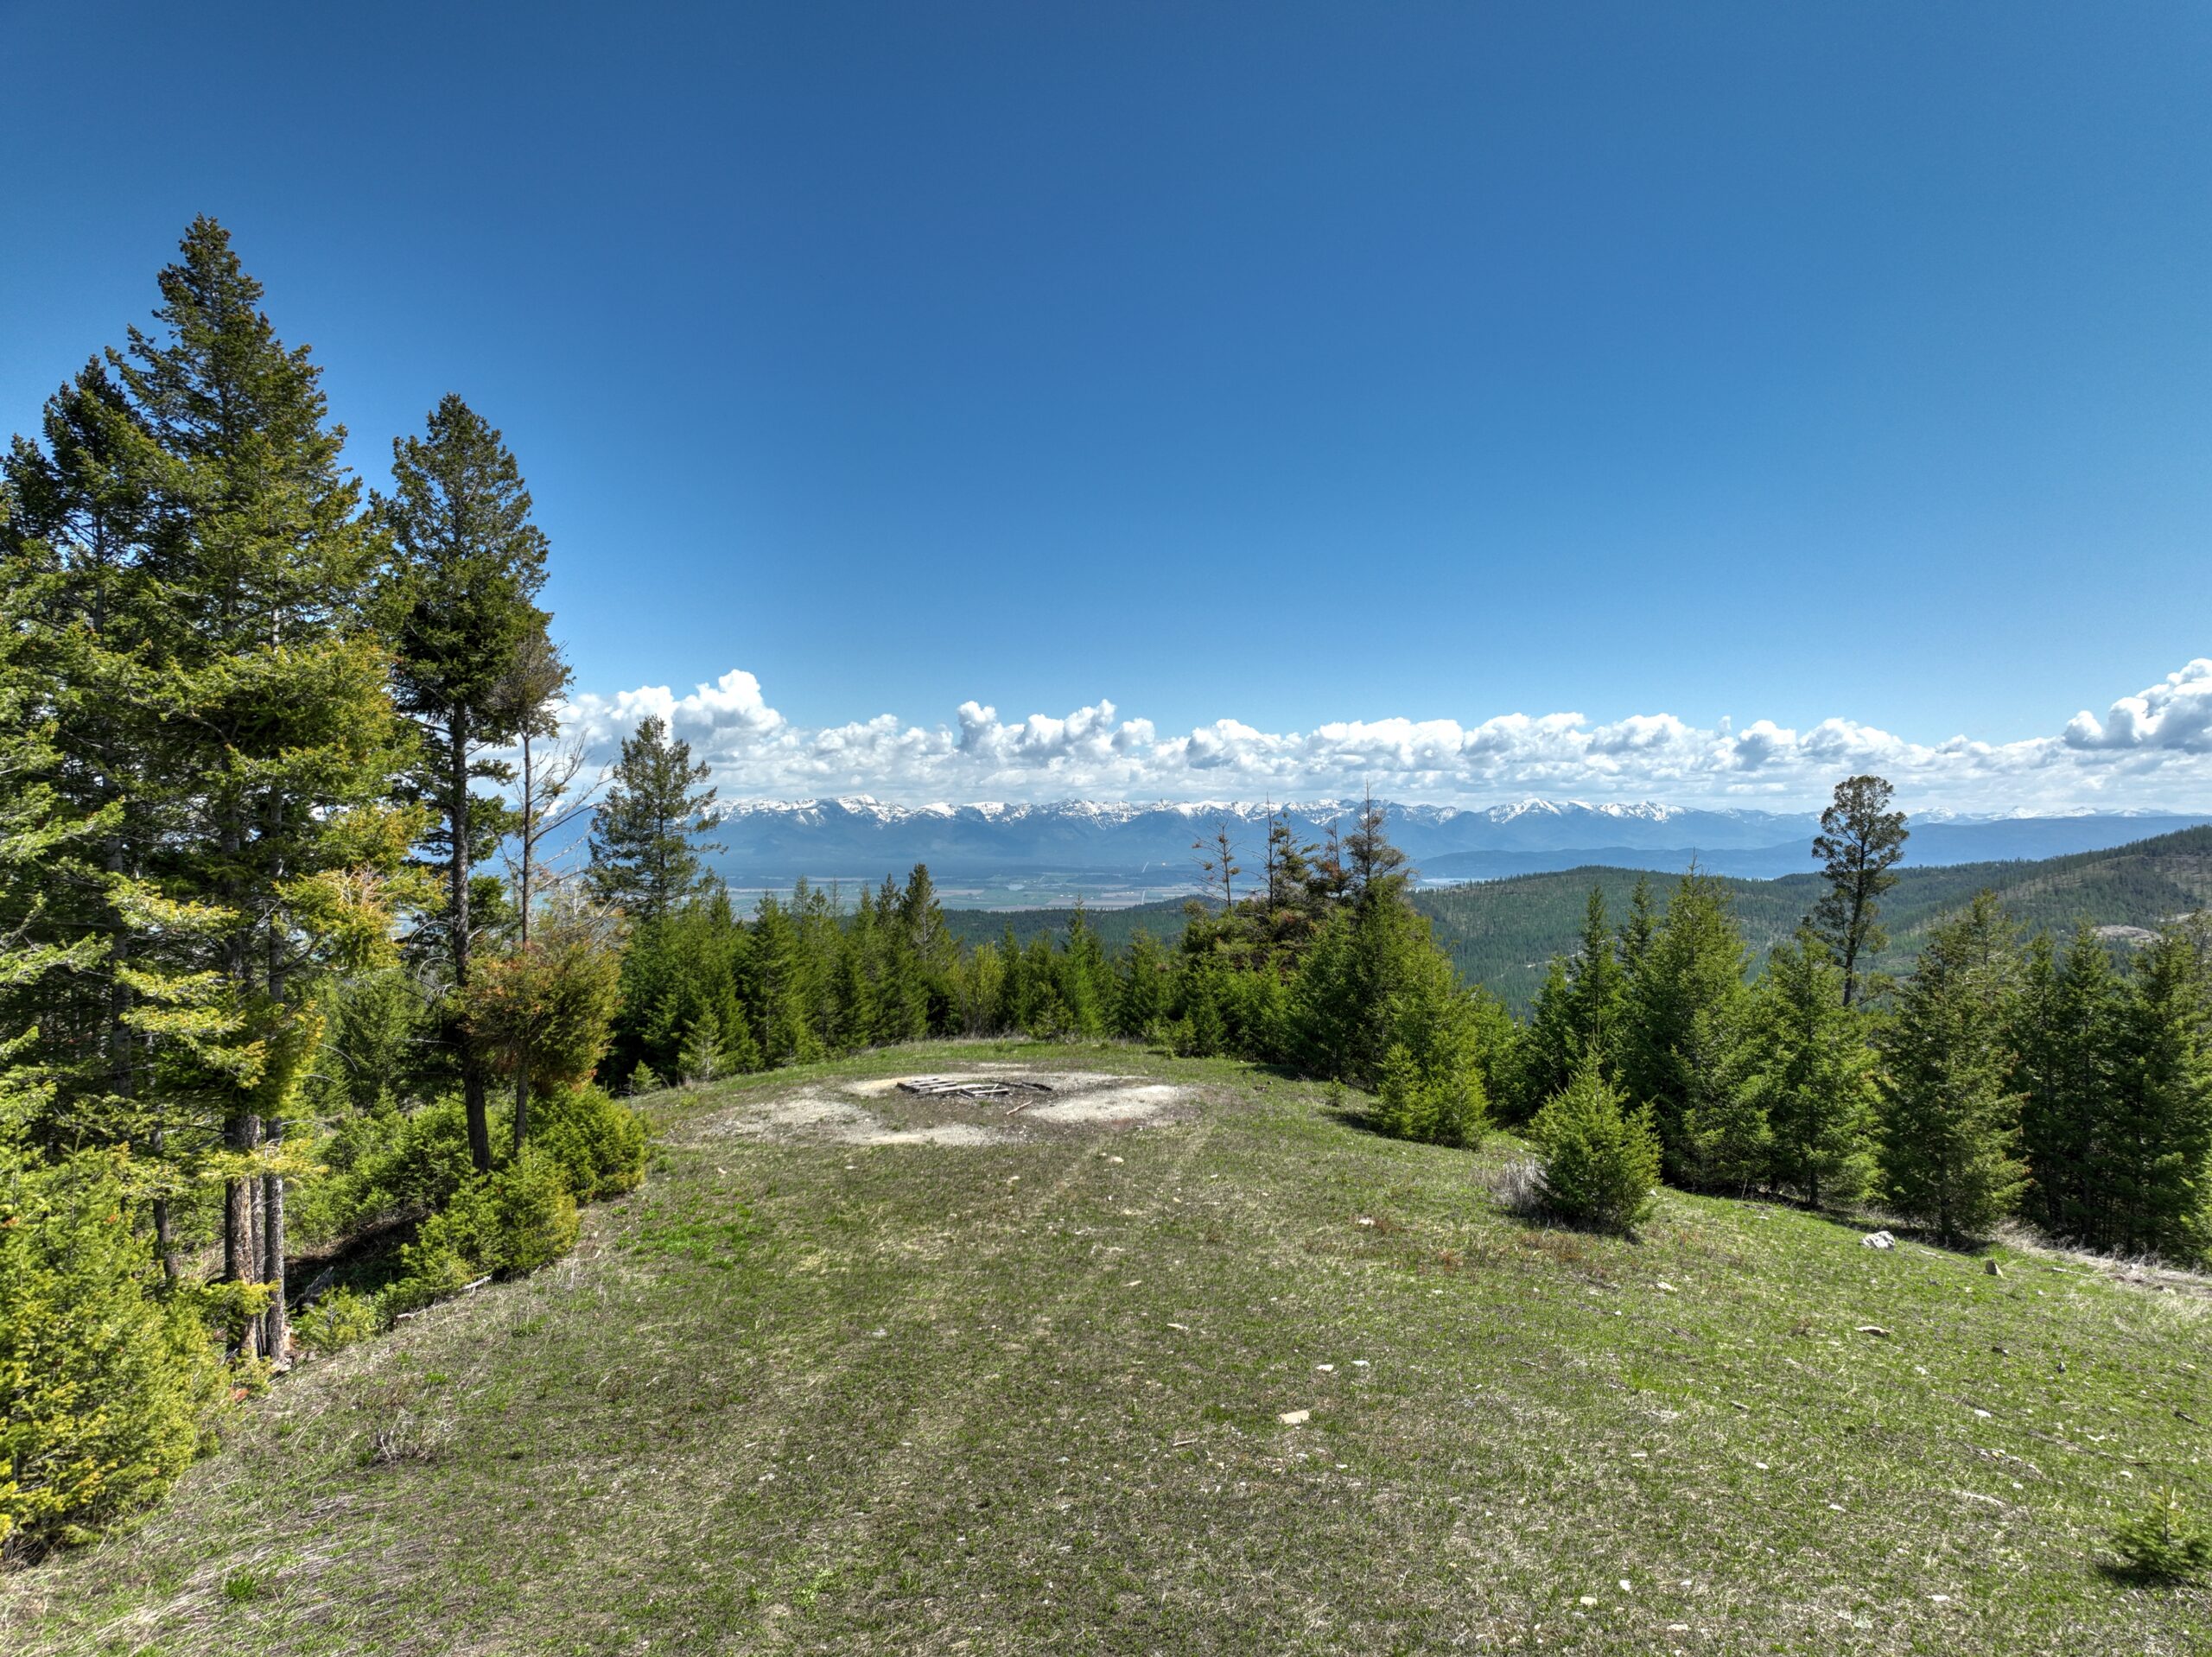 For Sale: NHN Emmons Canyon Road, Kalispell photo of build site and mountains in distance